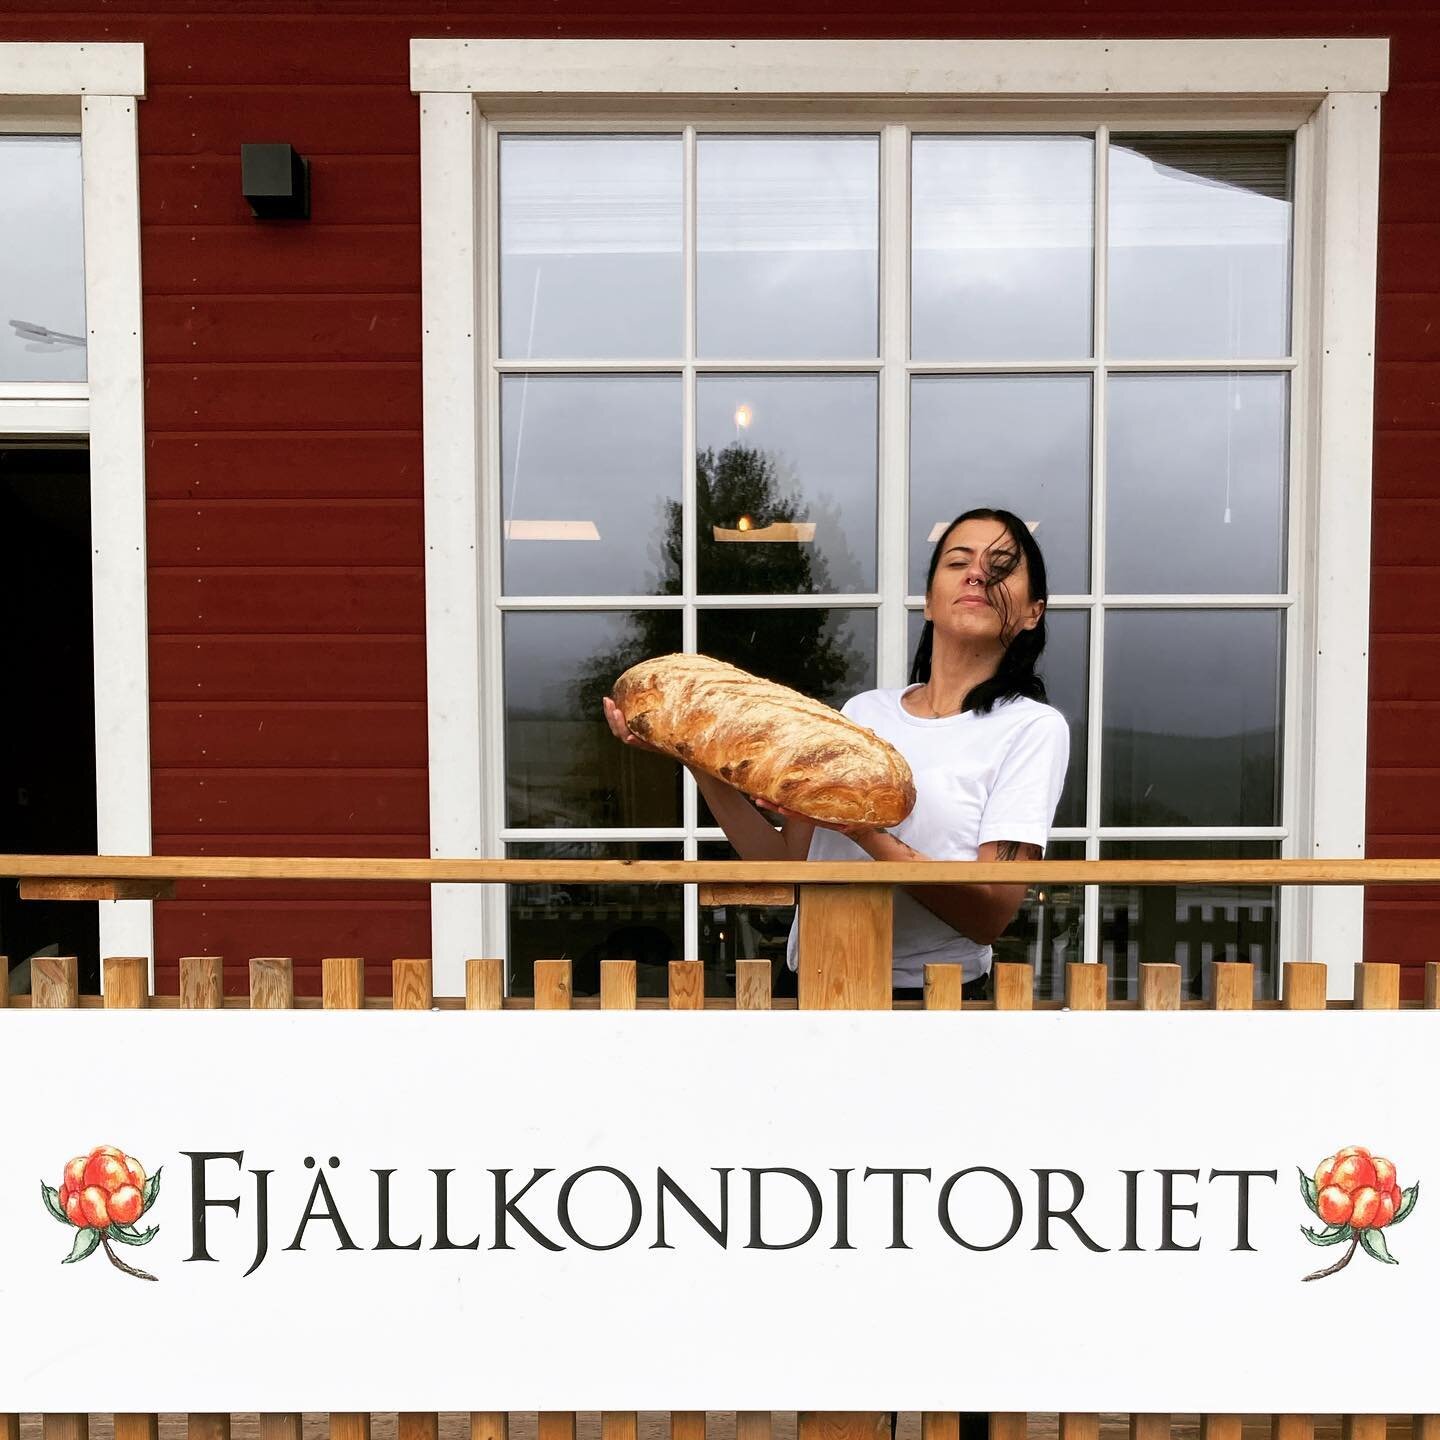 God morgon Lofsdalen! 😁We open till 18:00 so let&rsquo;s chill with @fjallkonditorietlofsdalen on this rainy Sunday 🙂☺️😎🌦️